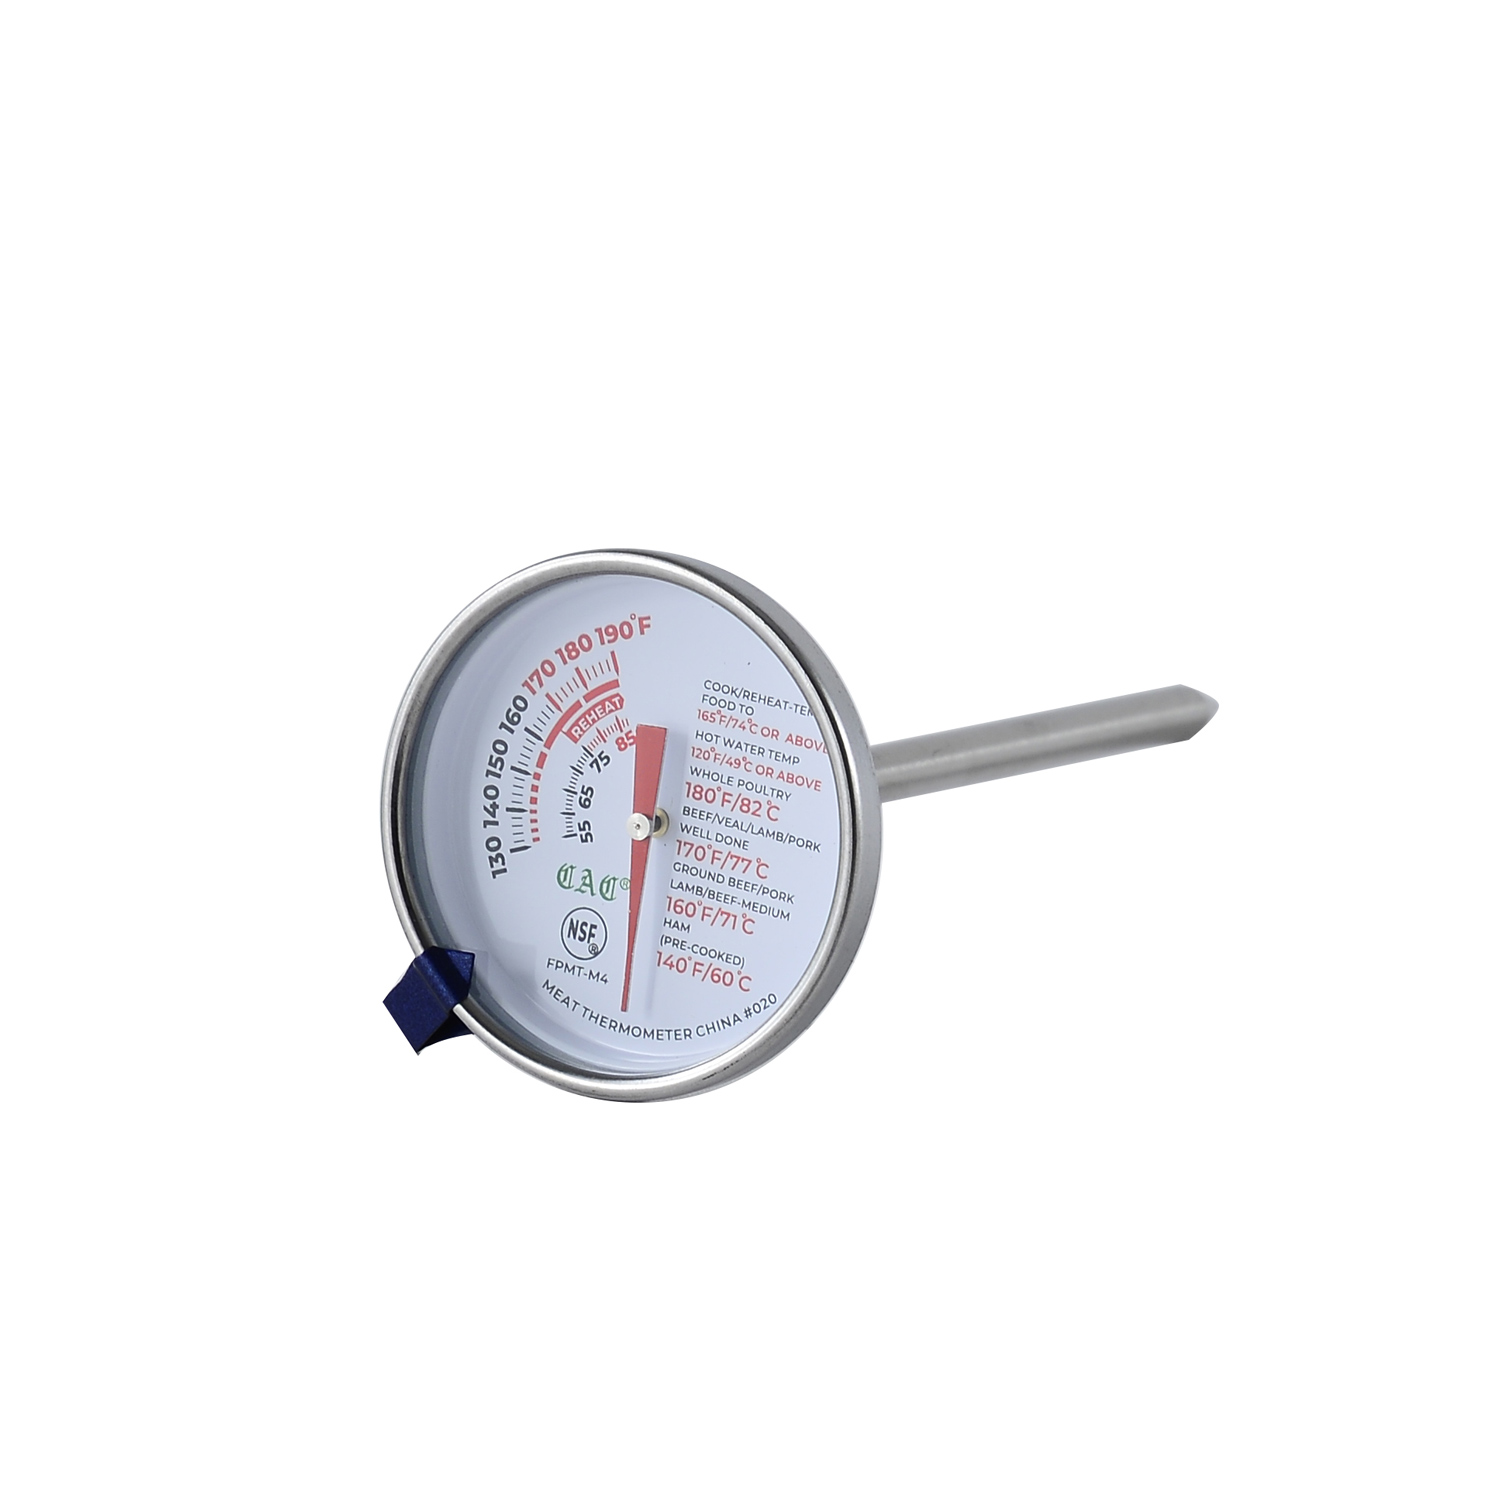 CAC China FPMT-M4 Equil Thermo Meat Thermometer, 2"Dia.